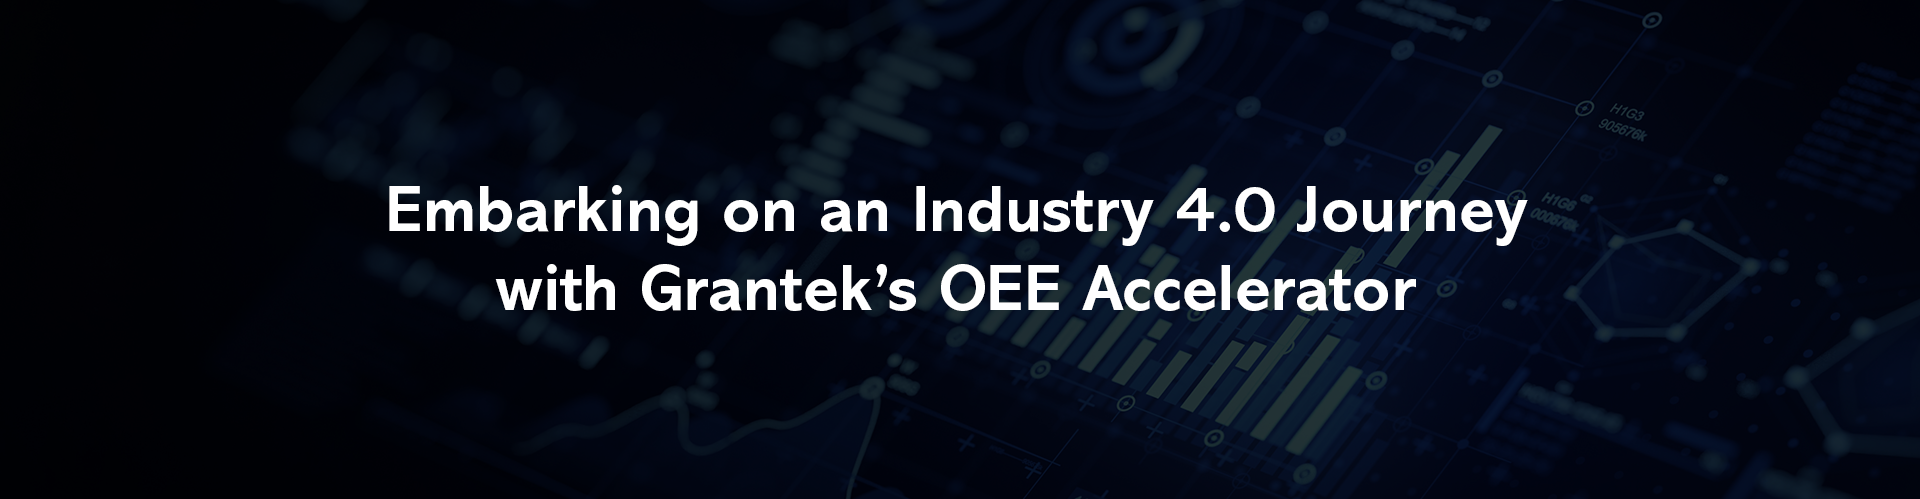 Embarking on an Industry 4.0 Journey with Grantek’s OEE Accelerator